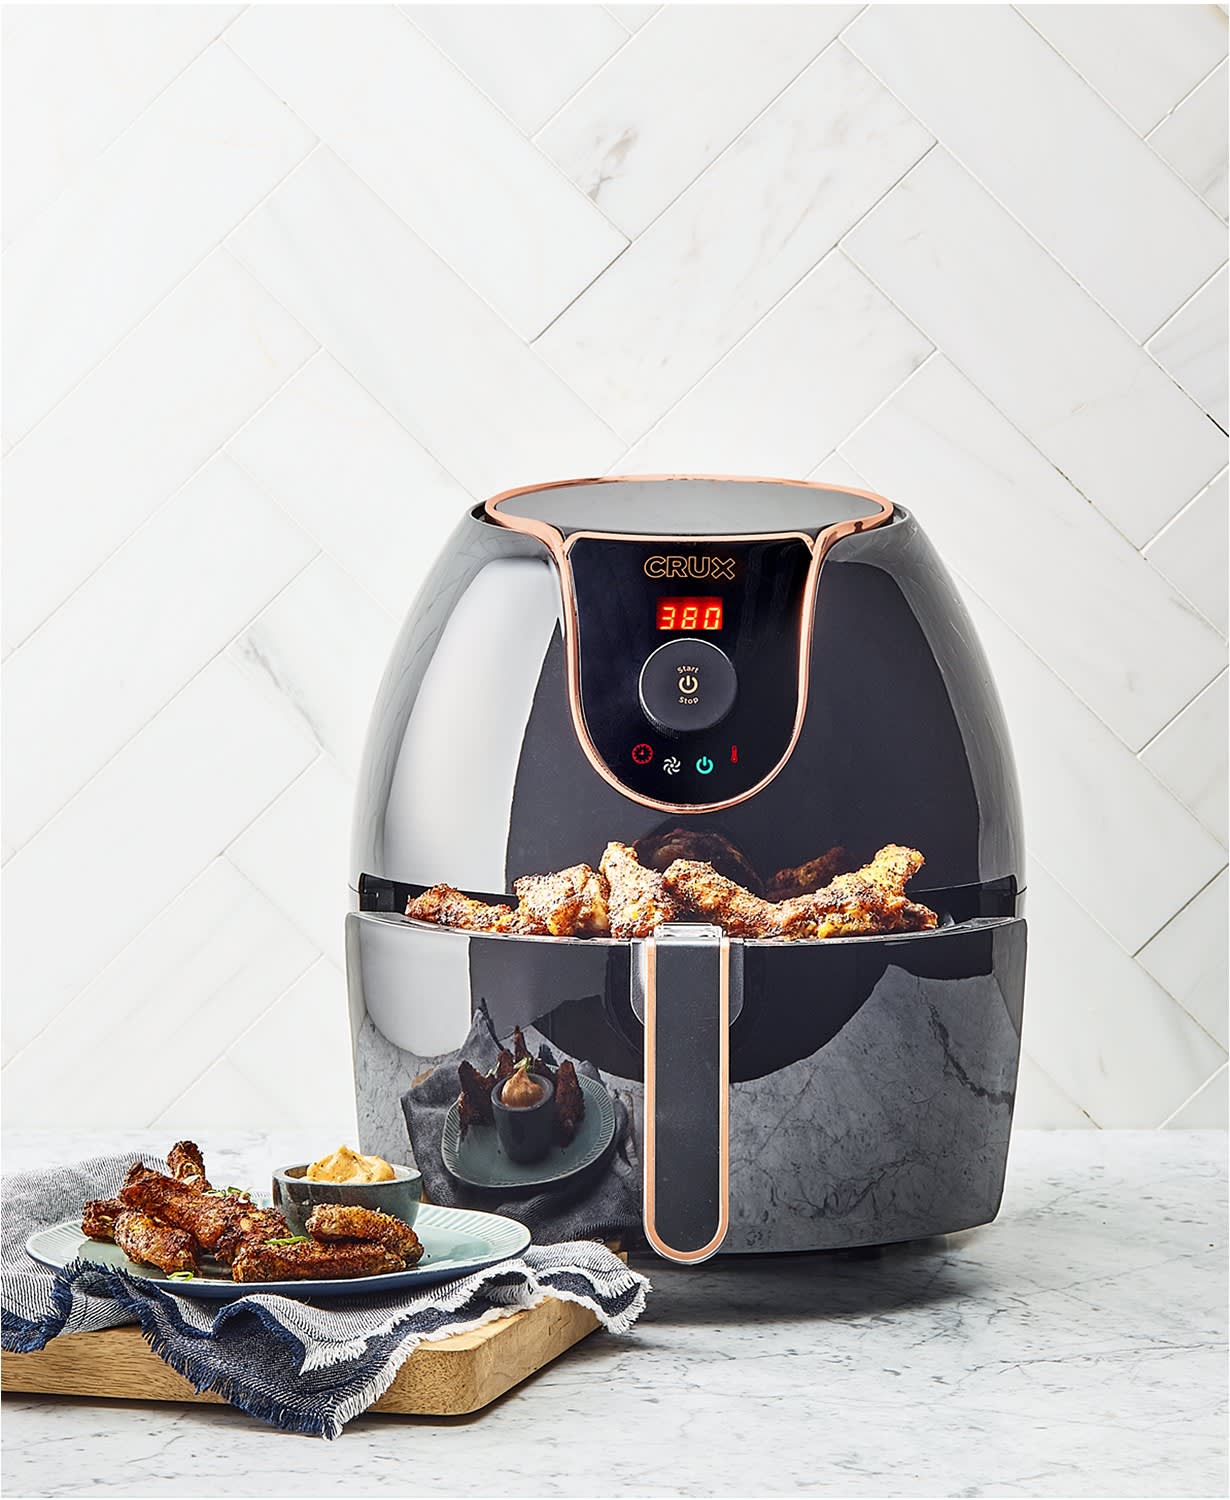 https://cdn.apartmenttherapy.info/image/upload/v1573239121/at/product%20listing/crux_Crux_5.3-Qt._Digital_Air_Convection_Fryer.jpg